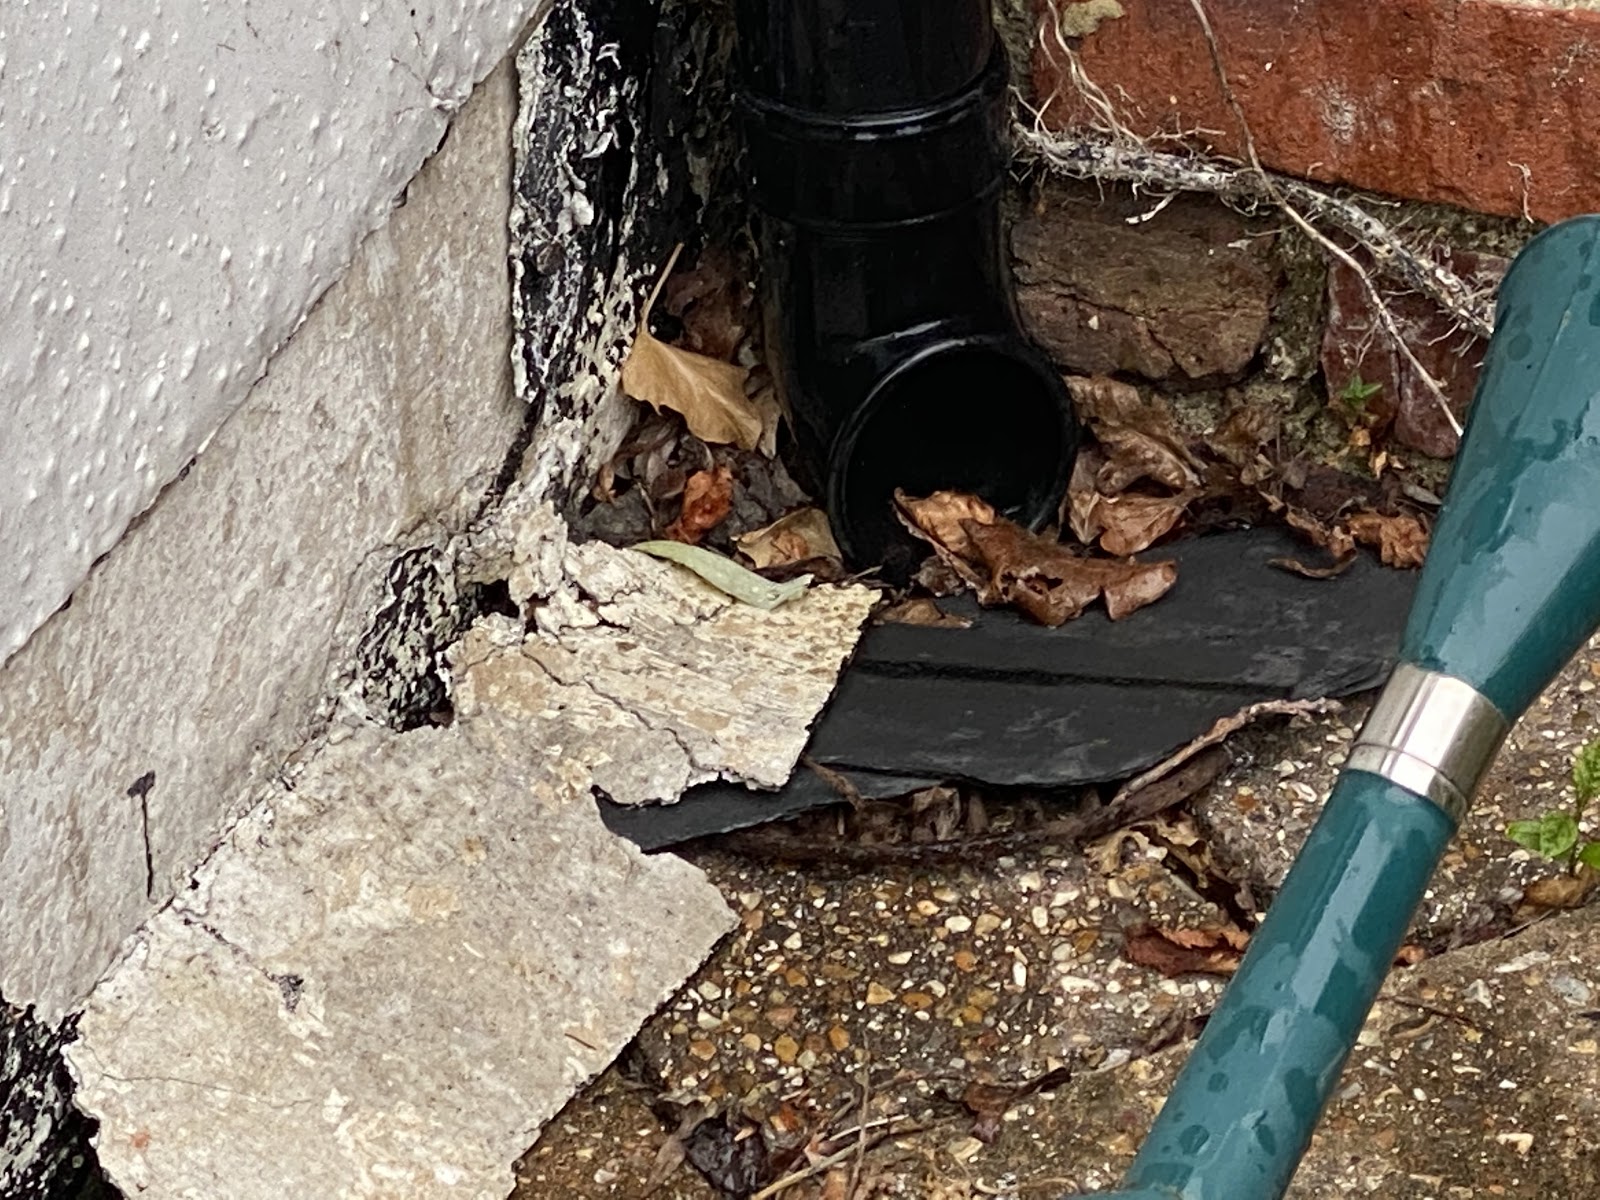 An image of surface water drainage in the form of a down pipe on the side of a house.